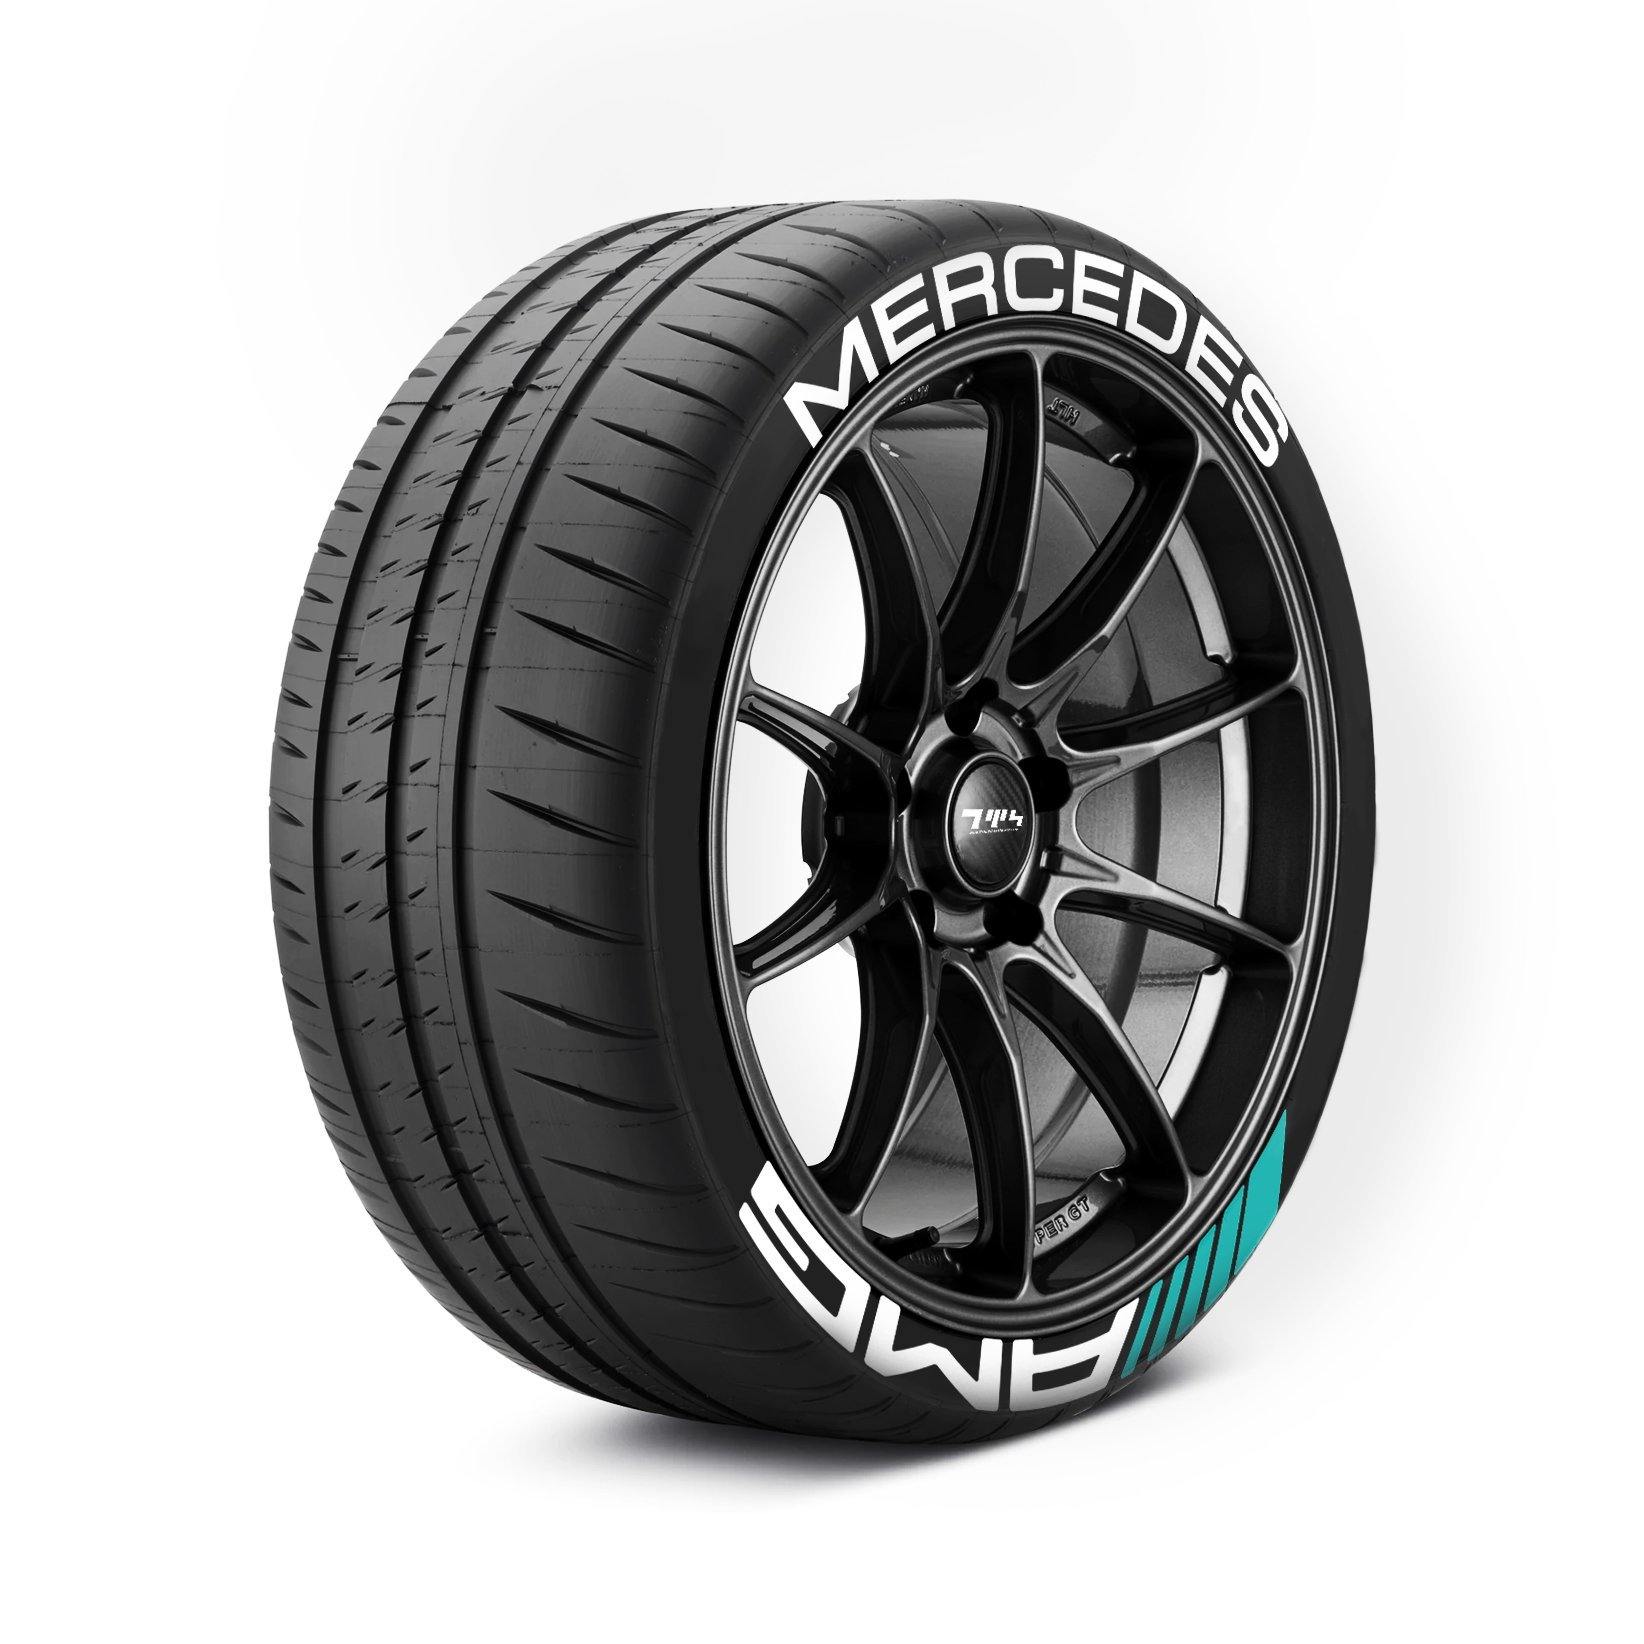 Mercades AMG Tyre Stickers - Tyre Wall Stickers